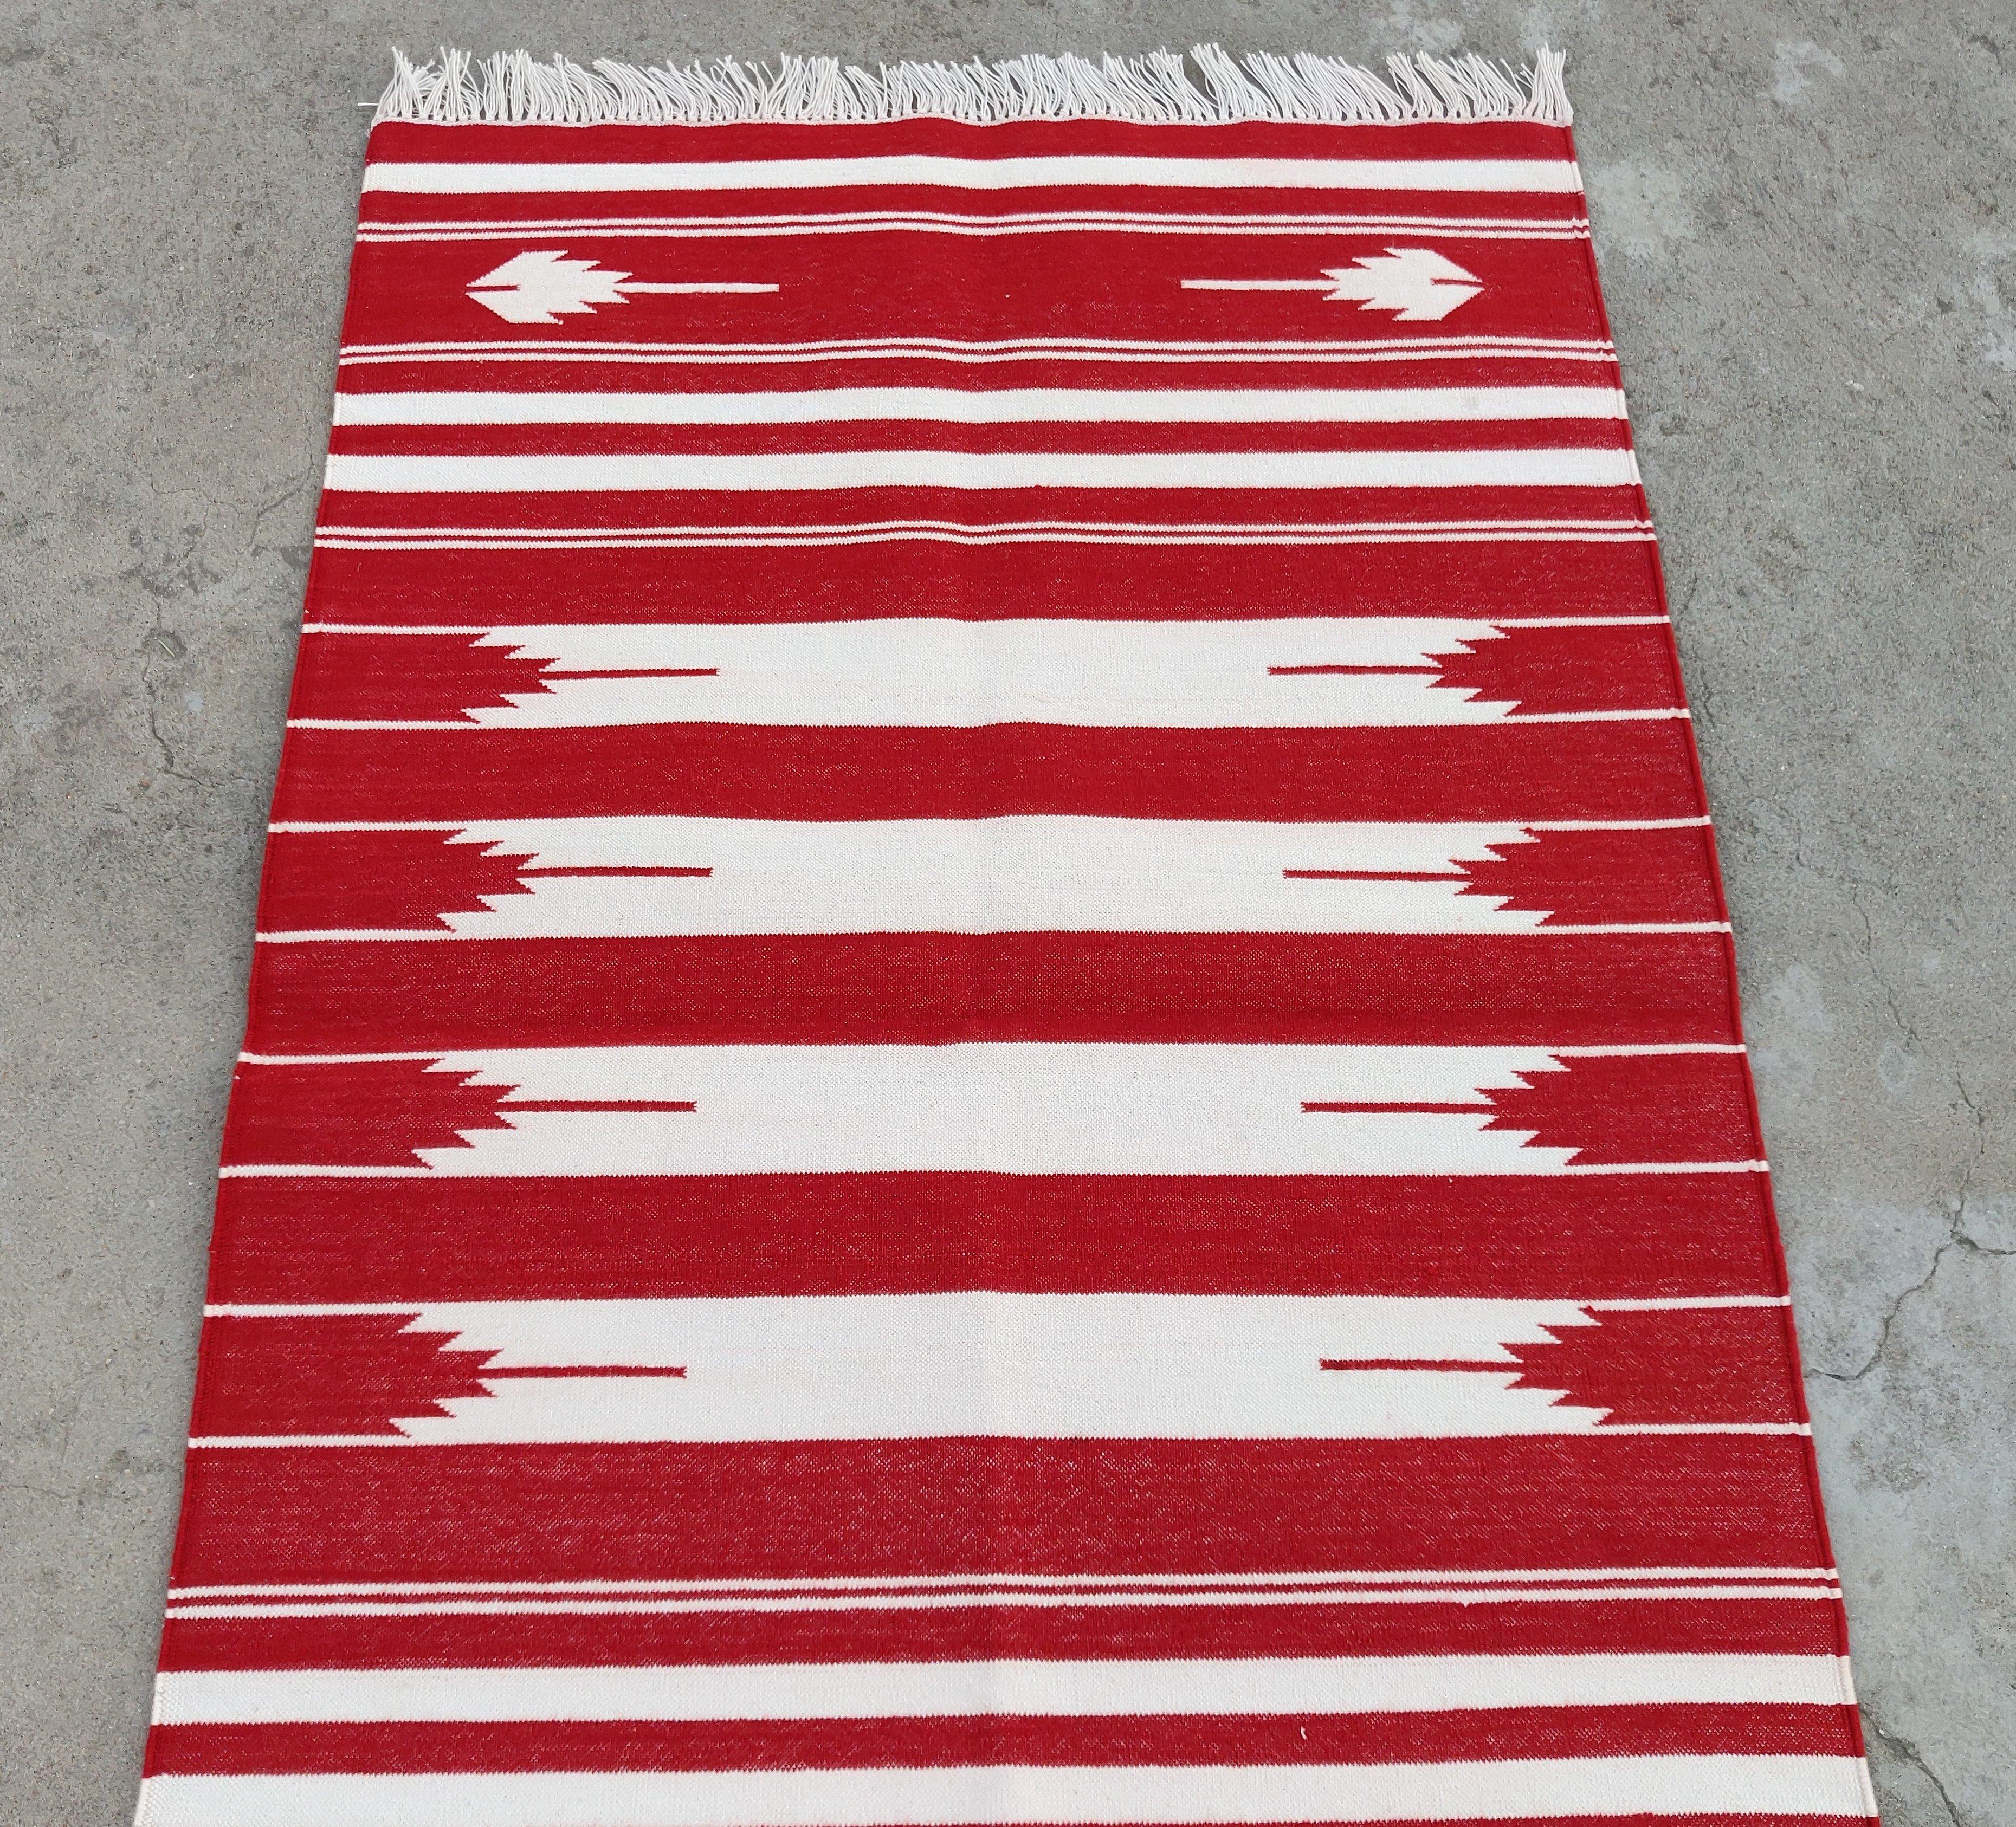 Contemporary Handmade Cotton Area Flat Weave Rug, 2.5'x4' Red And White Striped Indian Rug For Sale